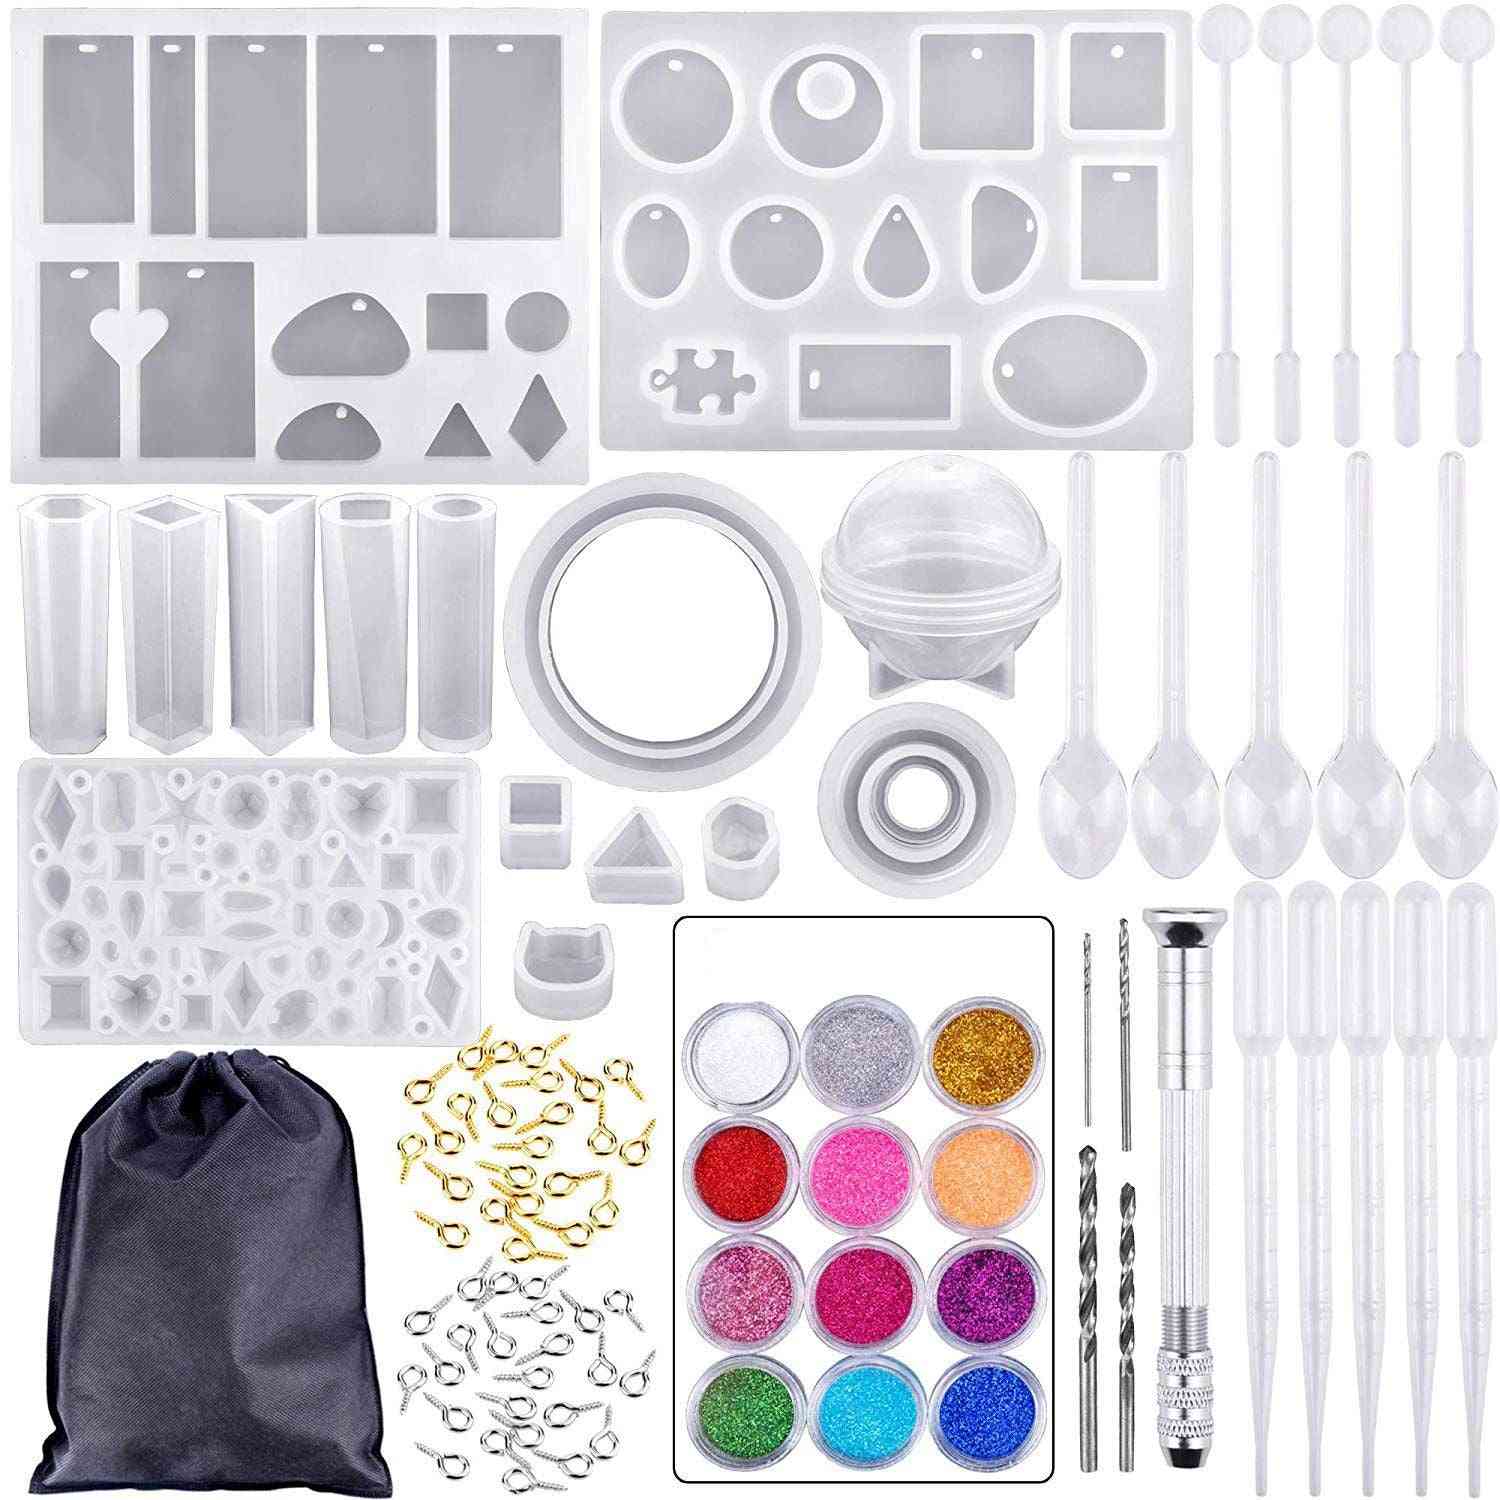 Silicone Casting Molds And Tools Set With A Black Storage Bag For Diy Jewelry Craft Making